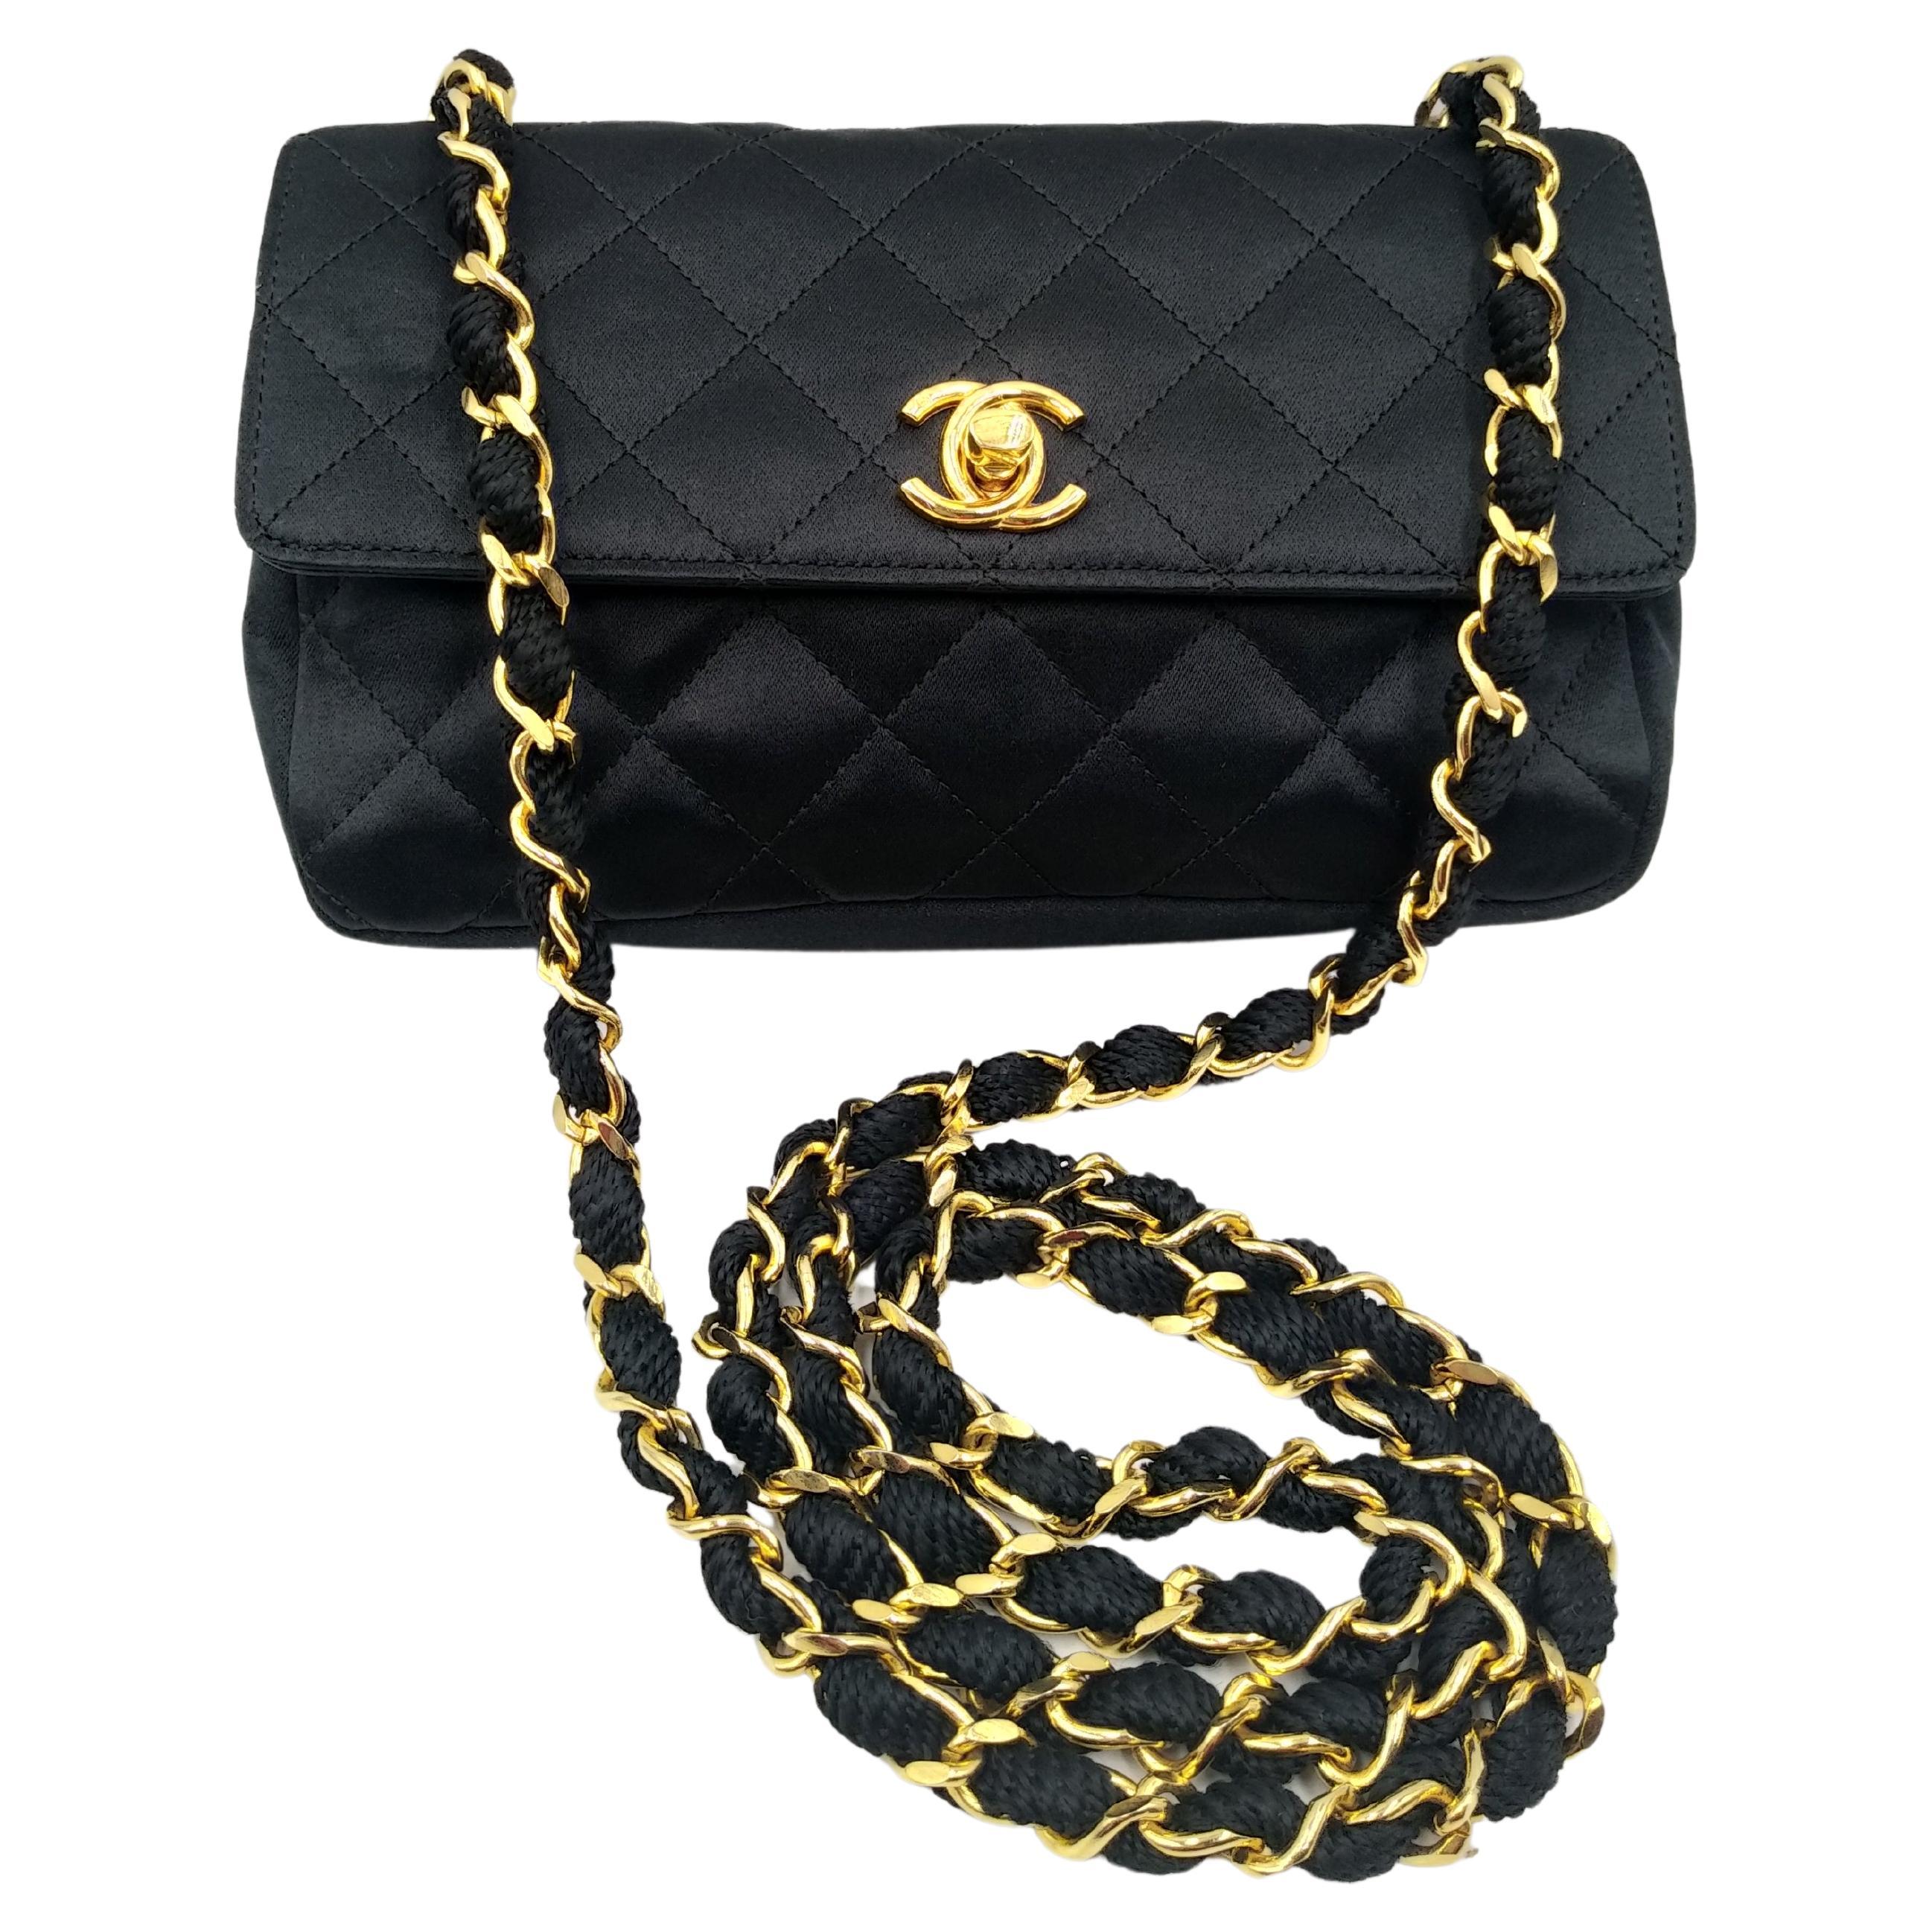 Chanel Vintage Black Mini Square Bag in Lambskin Leather with 24k Gold   Sellier